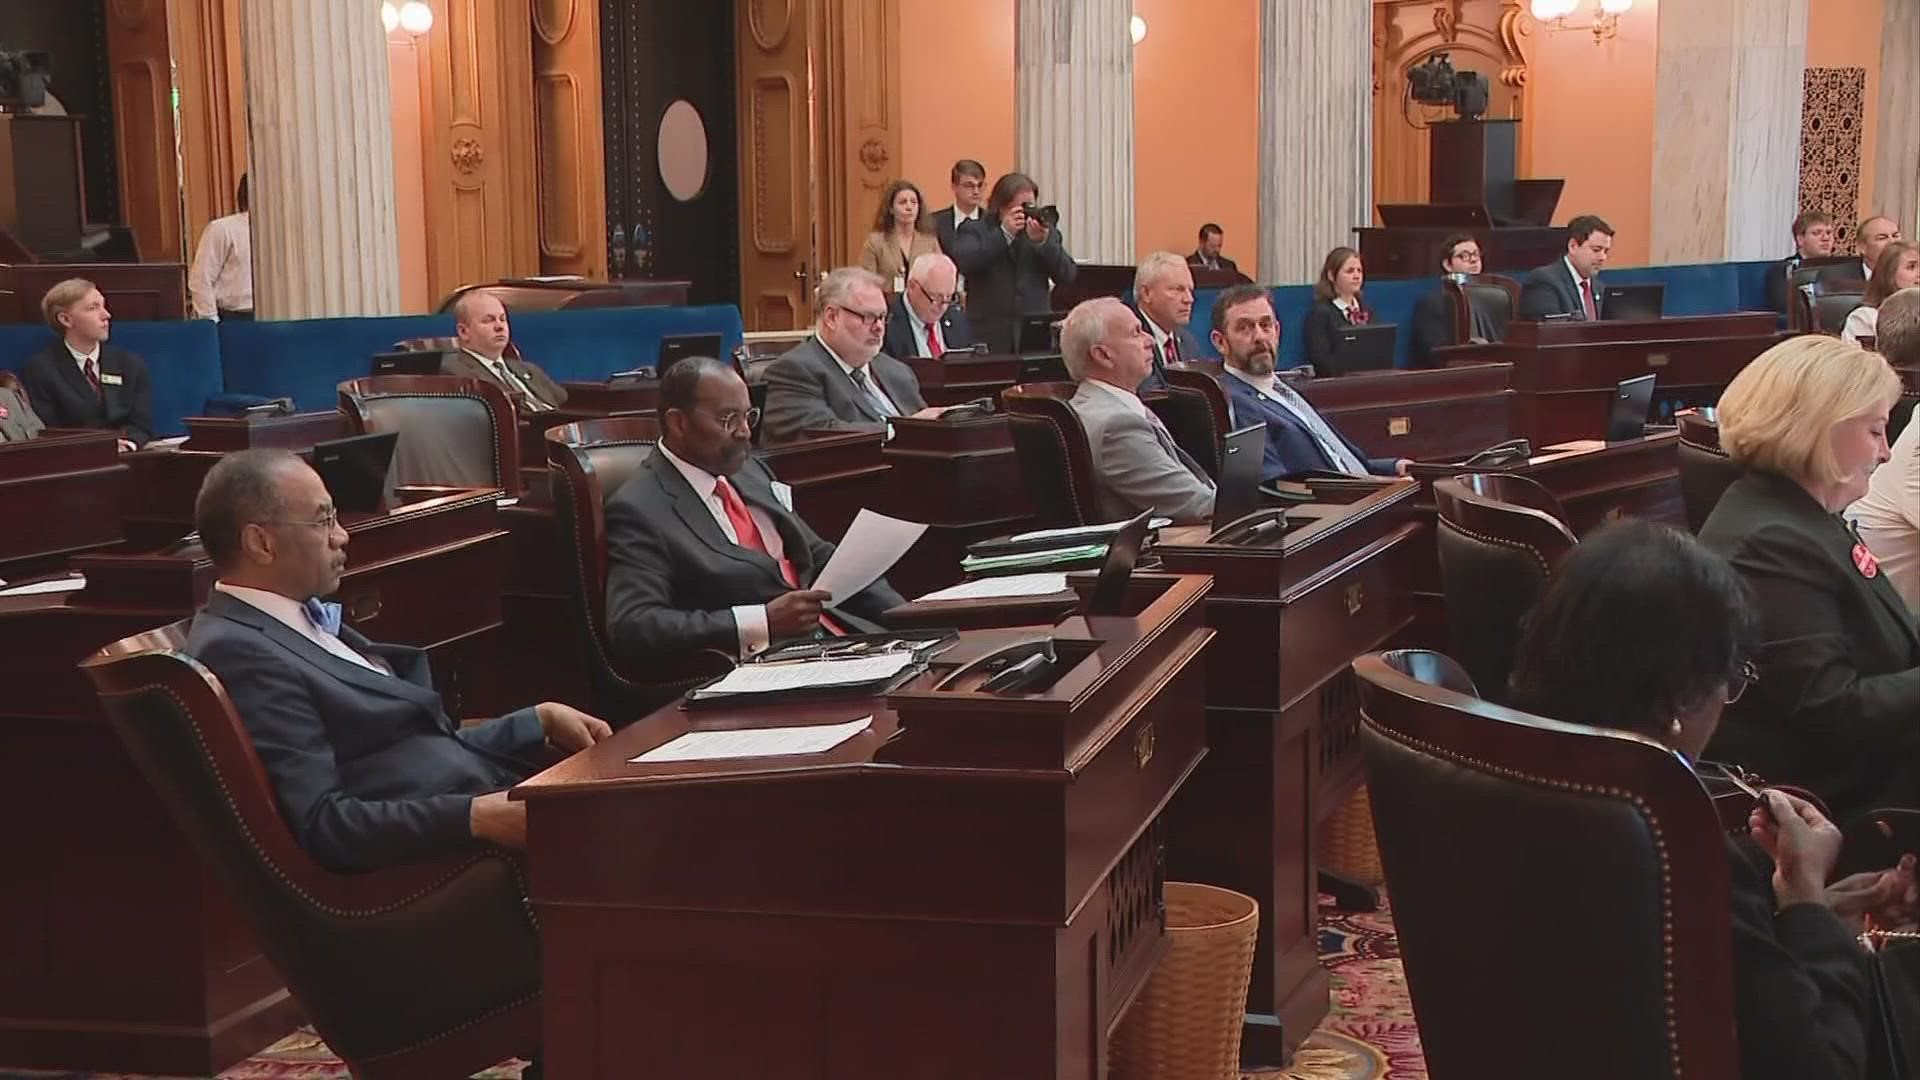 The bill will now go to the Ohio House for a vote. Gov. Mike DeWine is expected to sign the bill if it reaches his desk.